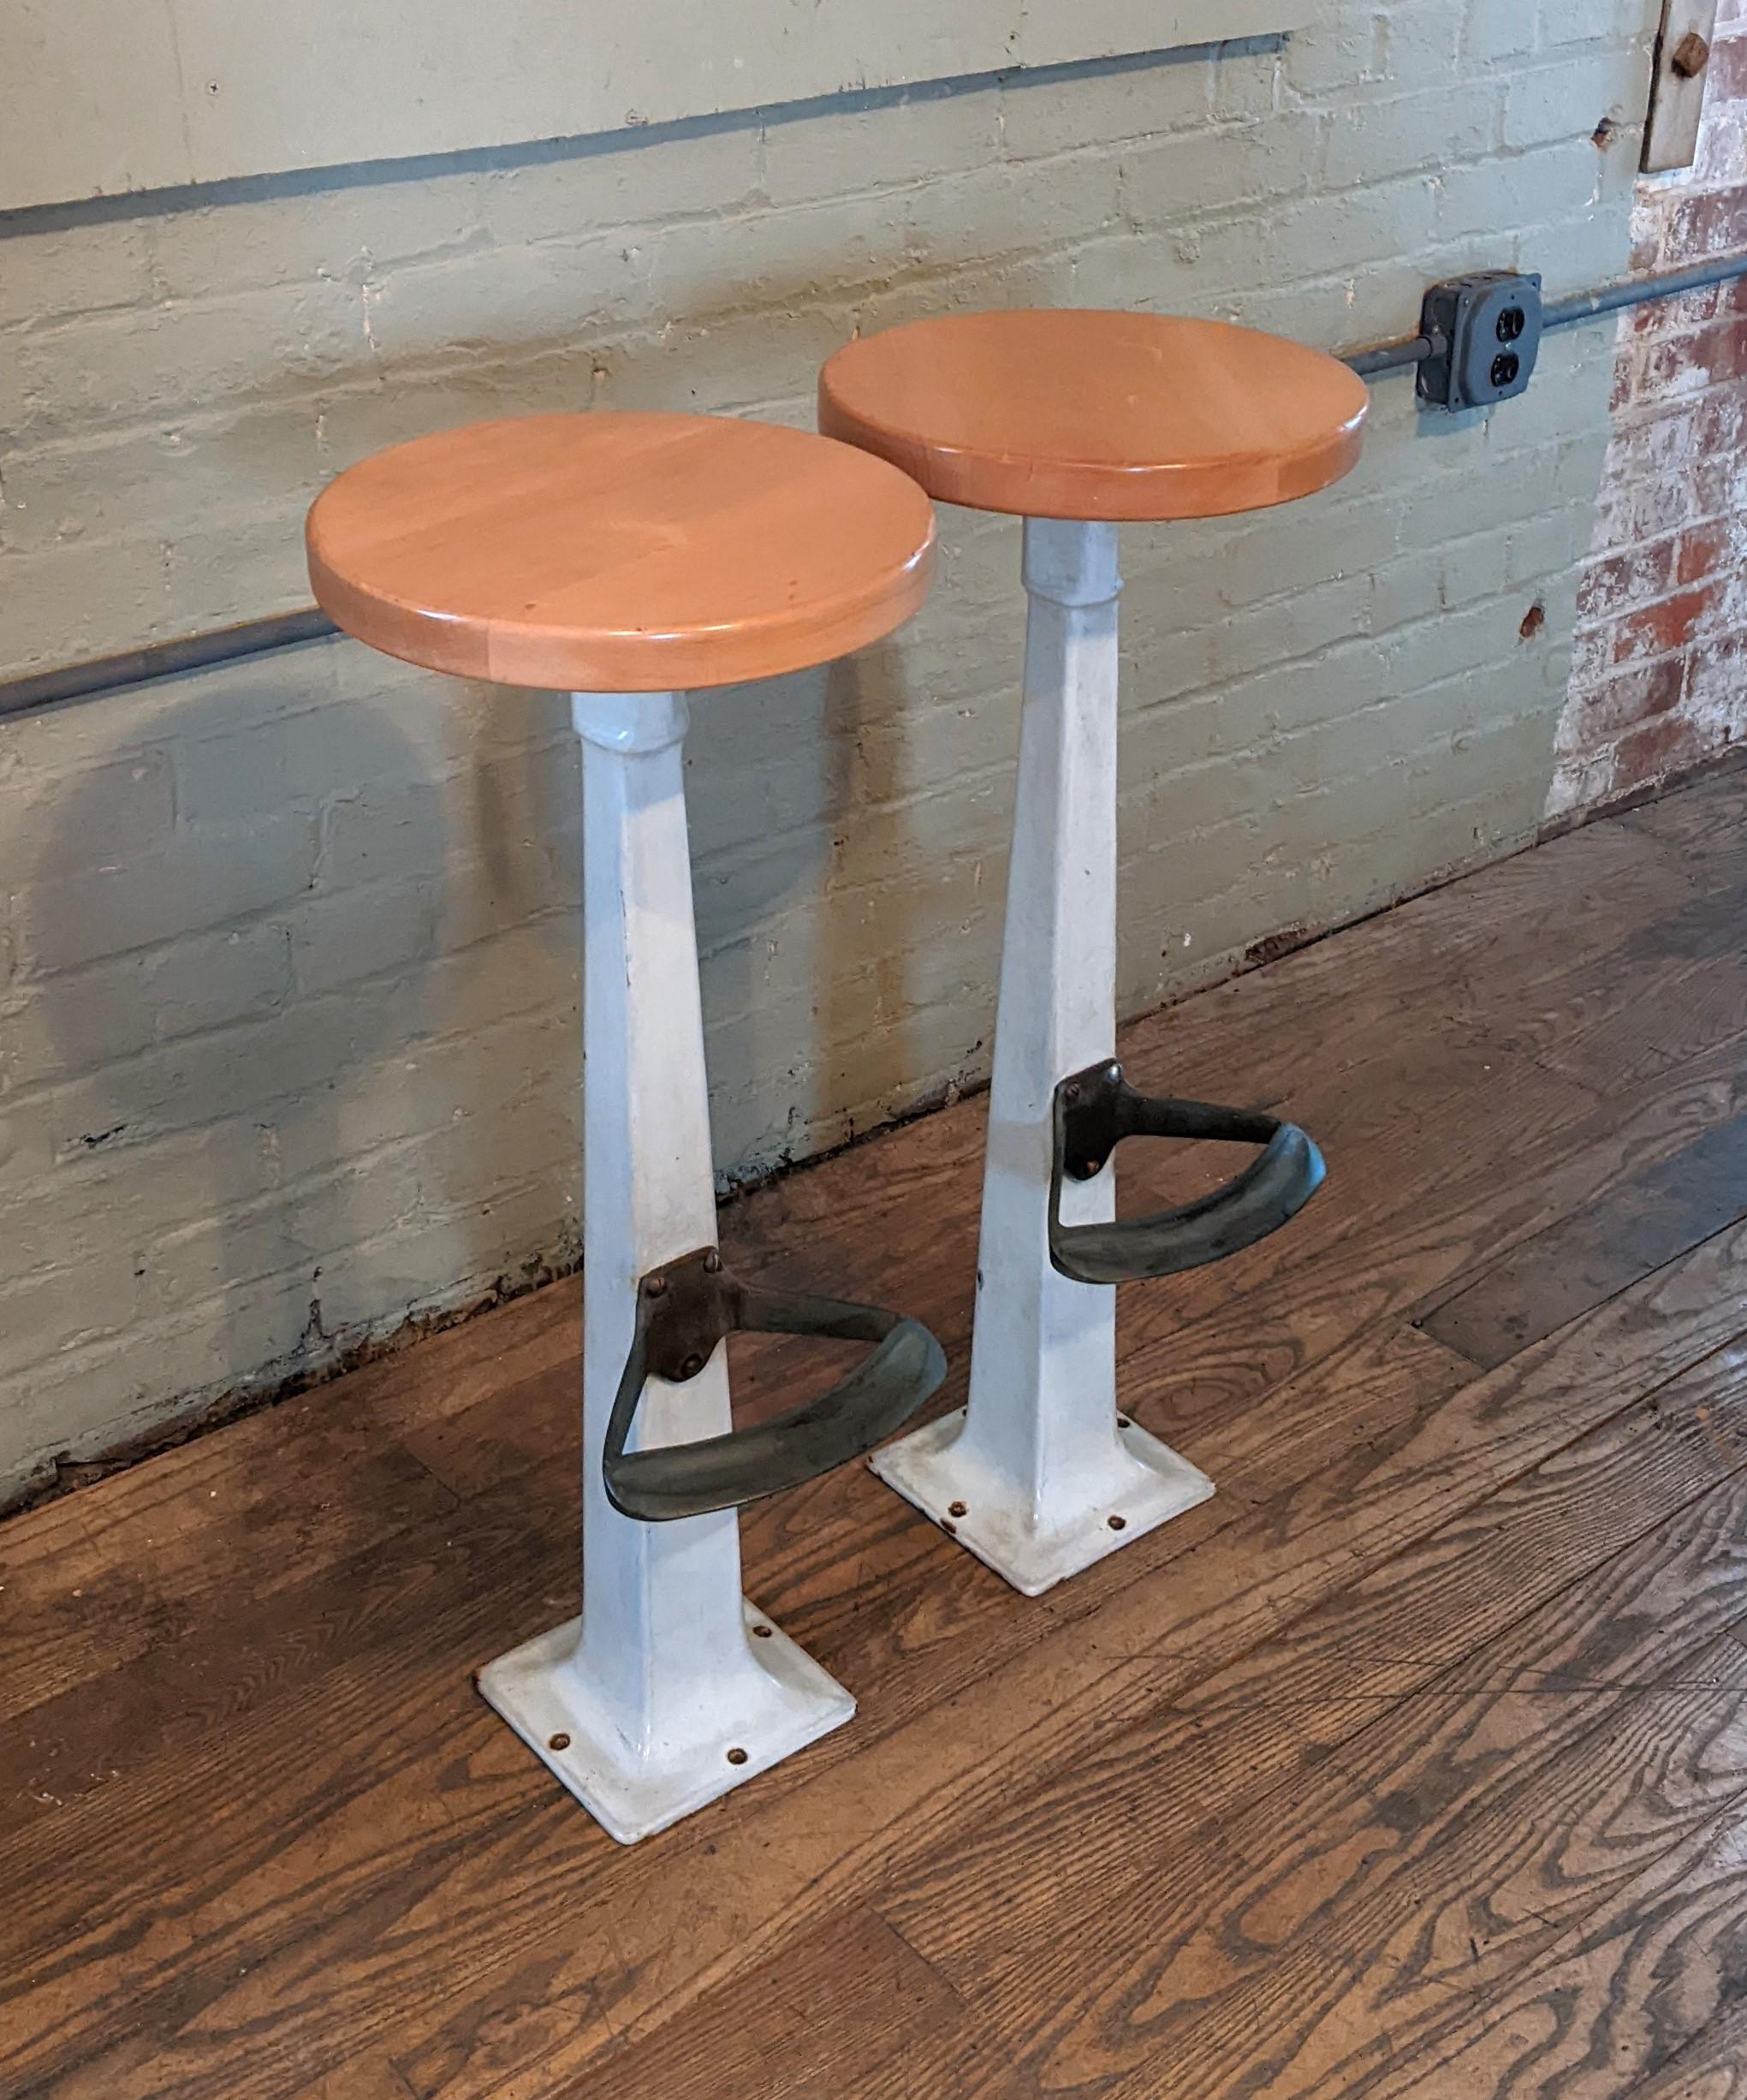 Pair of Counter Stools with Footrests 
*Only One Remaining*

Seat Height: 30 1/2